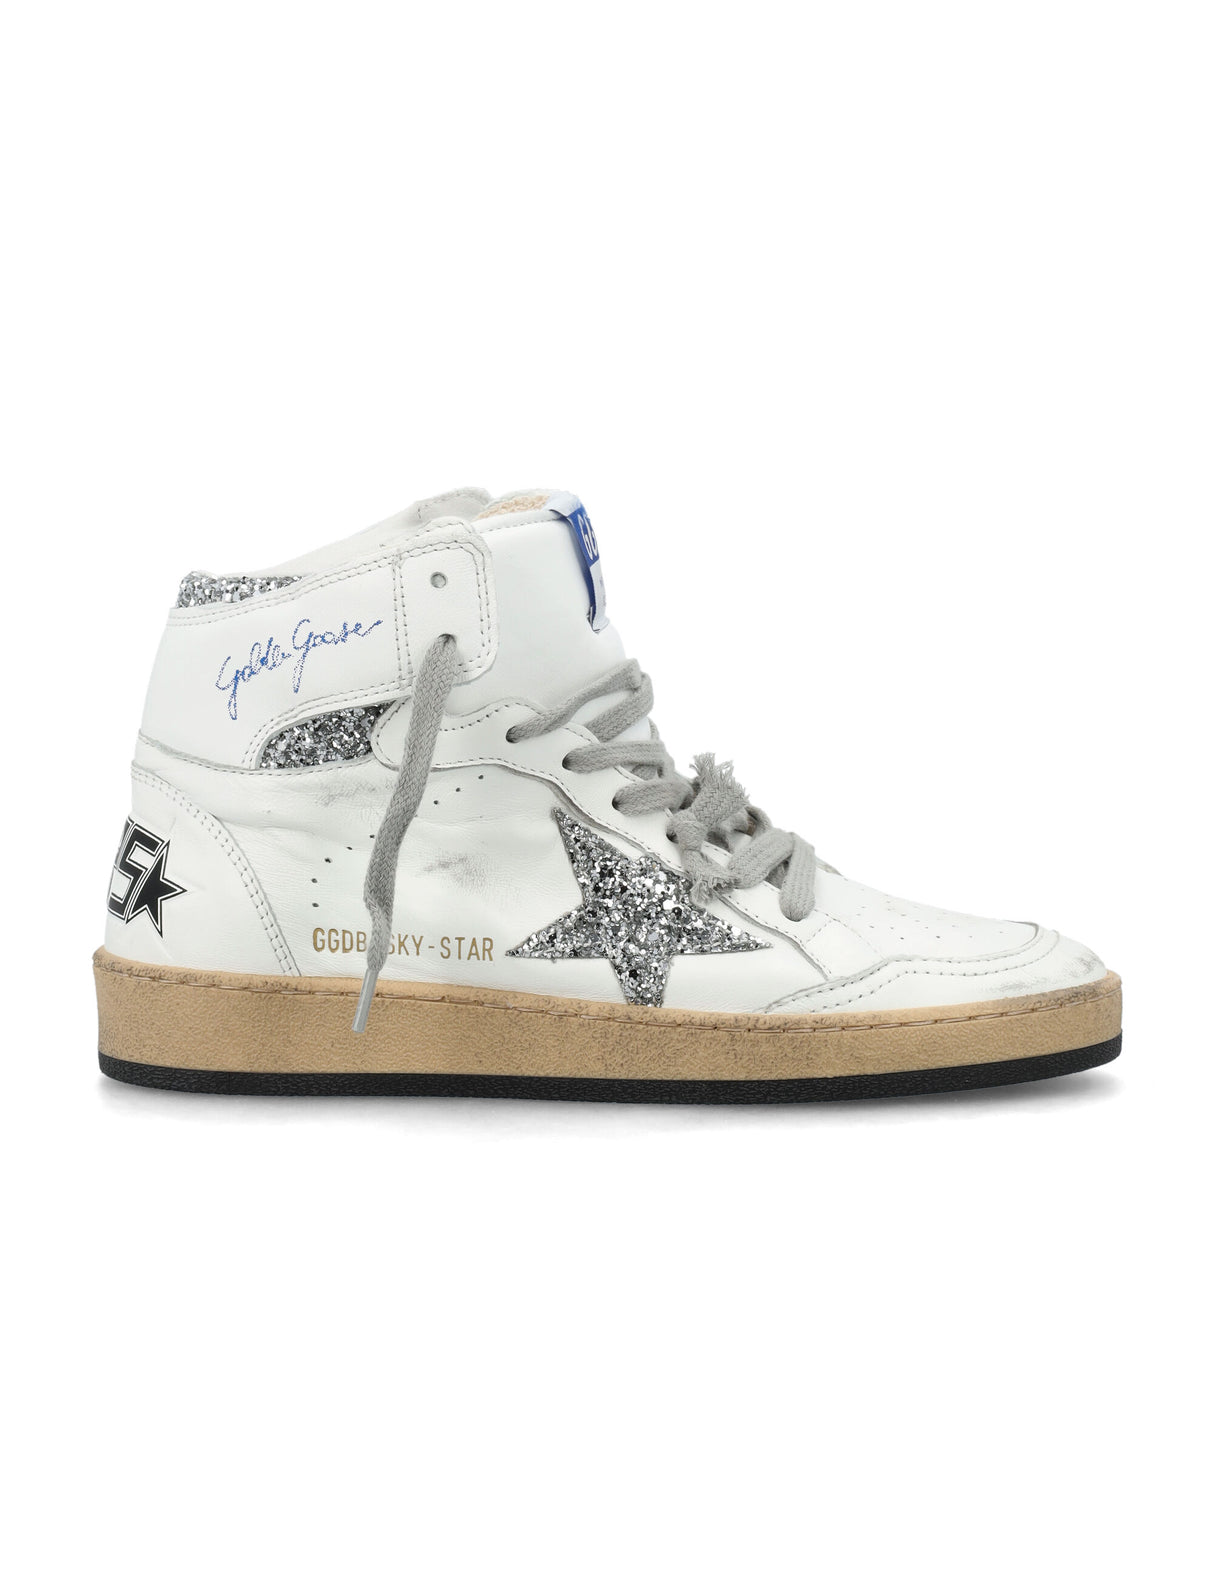 GOLDEN GOOSE Distressed Leather High Top Sneakers for Women - White/Silver